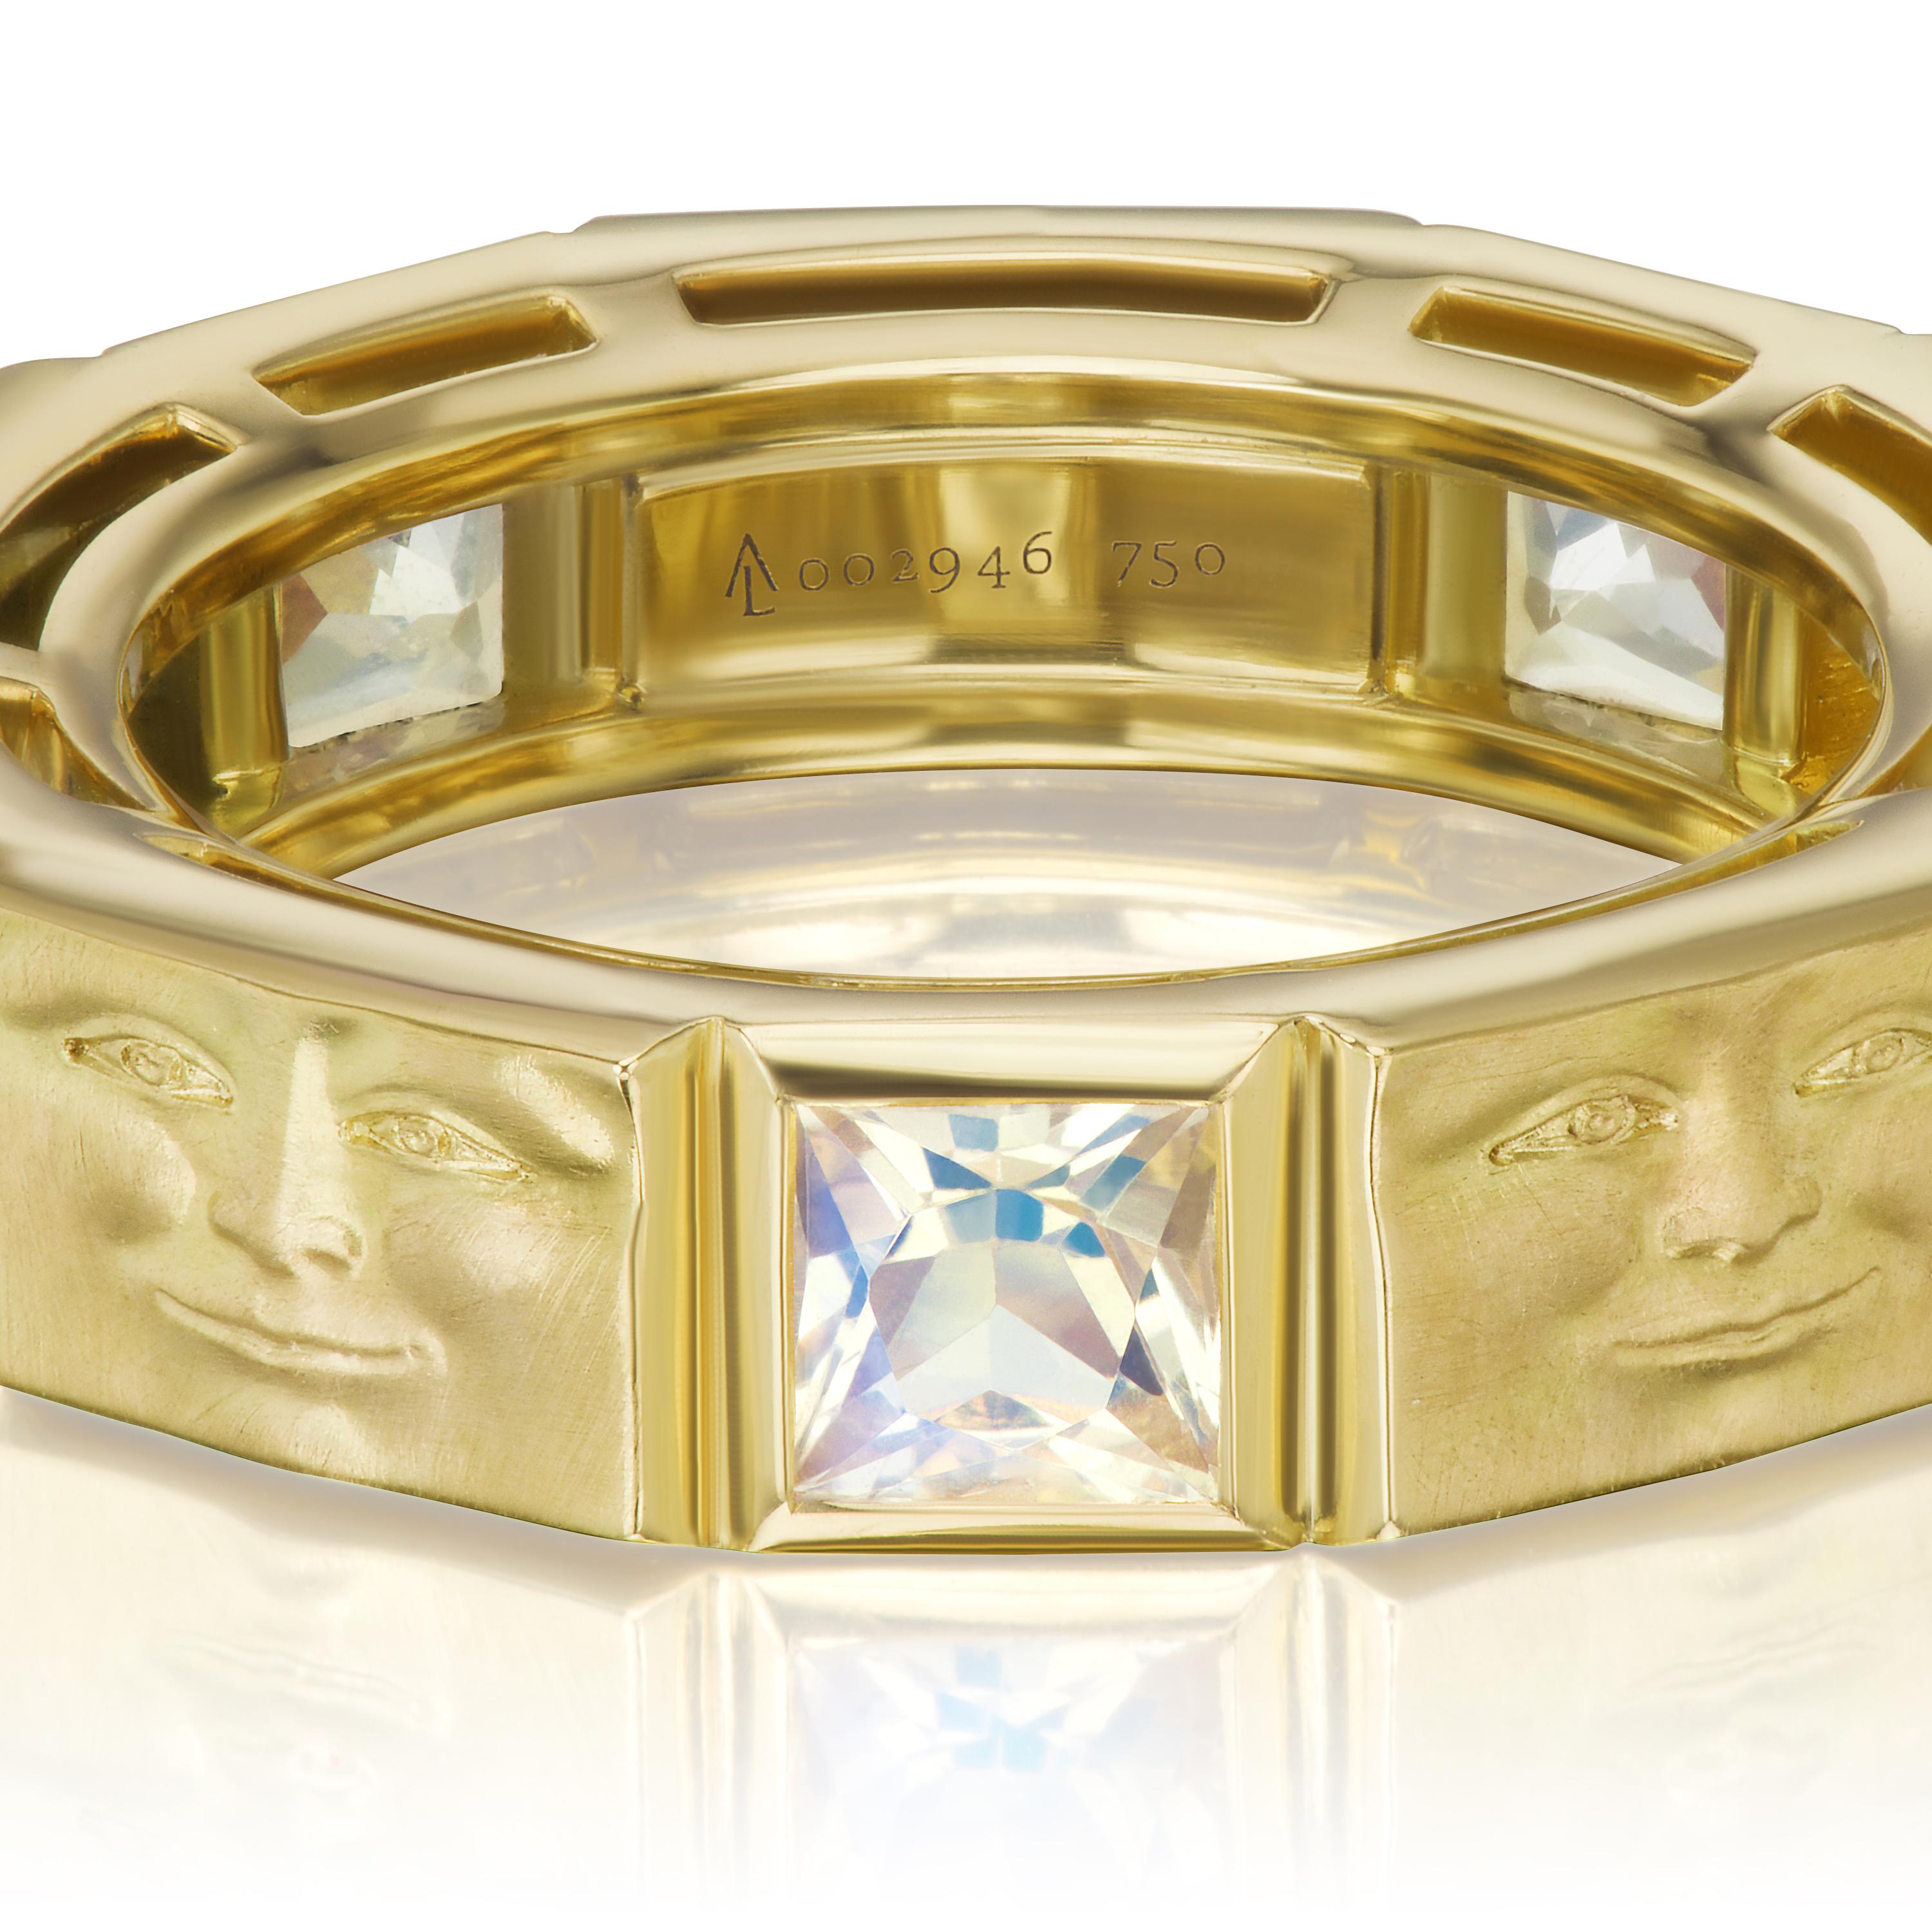 Eternity Brickface Band by jewelry maker Anthony Lent hand-fabricated in matte and high-polished 18k yellow gold featuring five beautifully-matched princess-cut moonstones. Size 5.75+ (can be sized). Stamped and hallmarked - AL - 002946 (serial